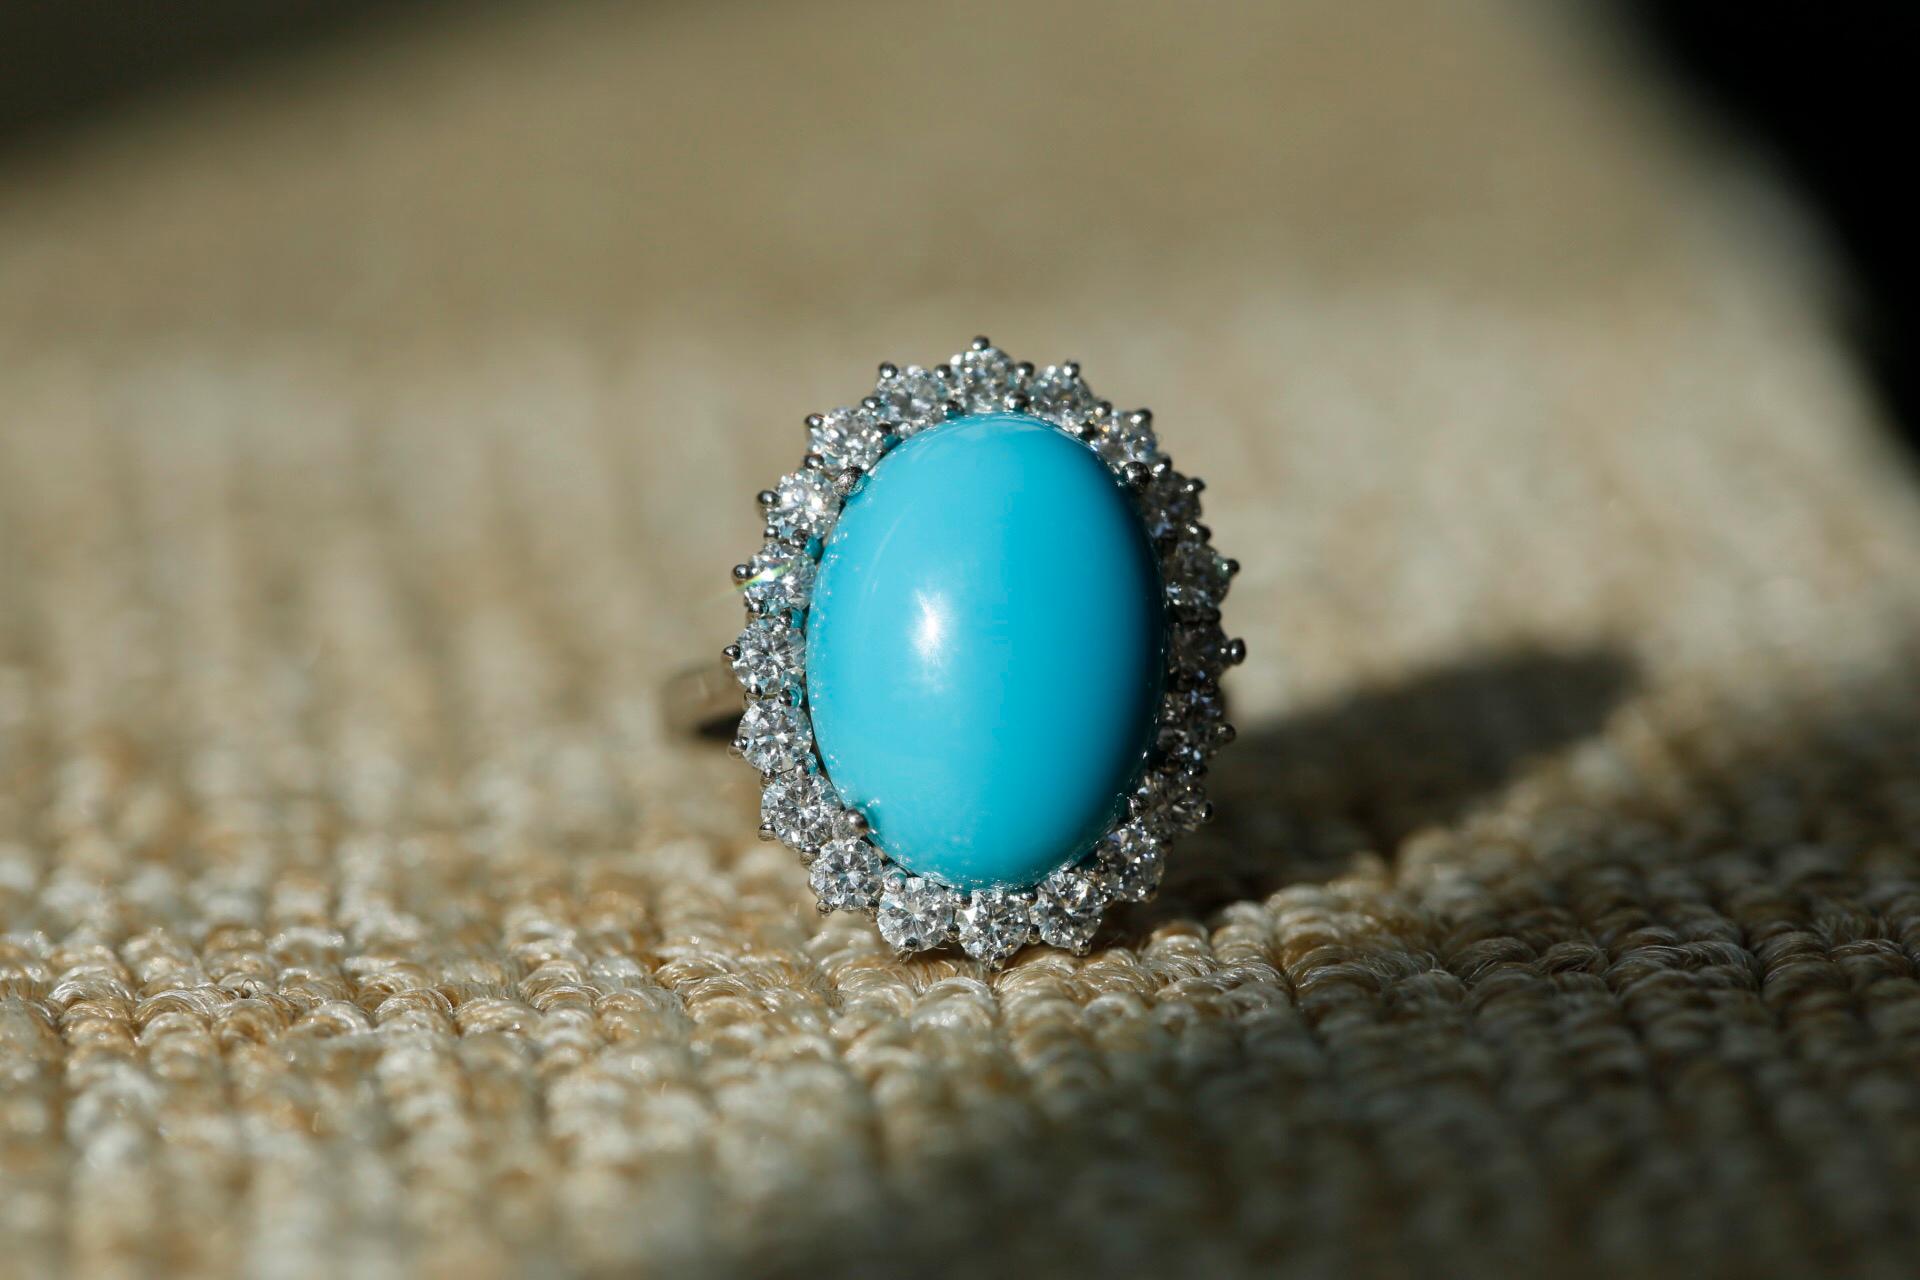 A captivating oval cabochon sleeping beauty turquoise enclosed by captivating bright and lively diamonds are all set in 18 karat white gold. This is the type of ring that you need to brighten up these dreary winter days; a delightful addition to any